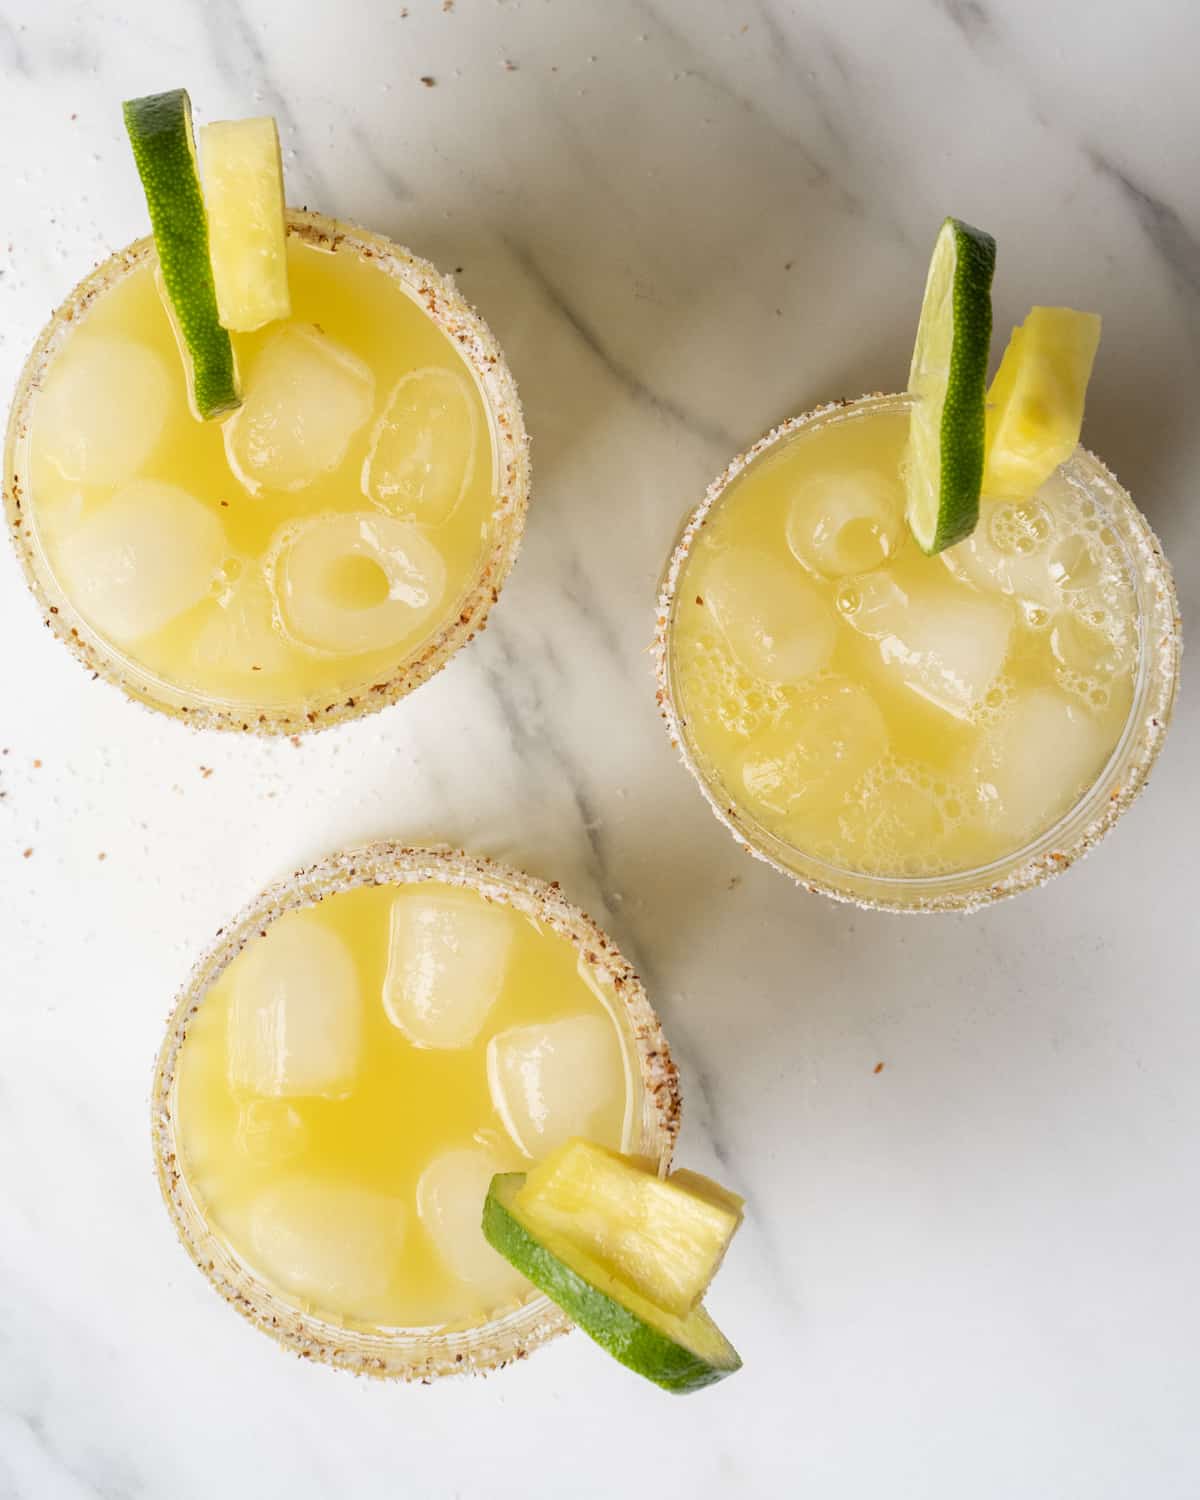 Pineapple juice, orange juice, lime juice, tequila, and ice in three tajin rimmed glasses with a lime slice and pineapple wedge garnish 